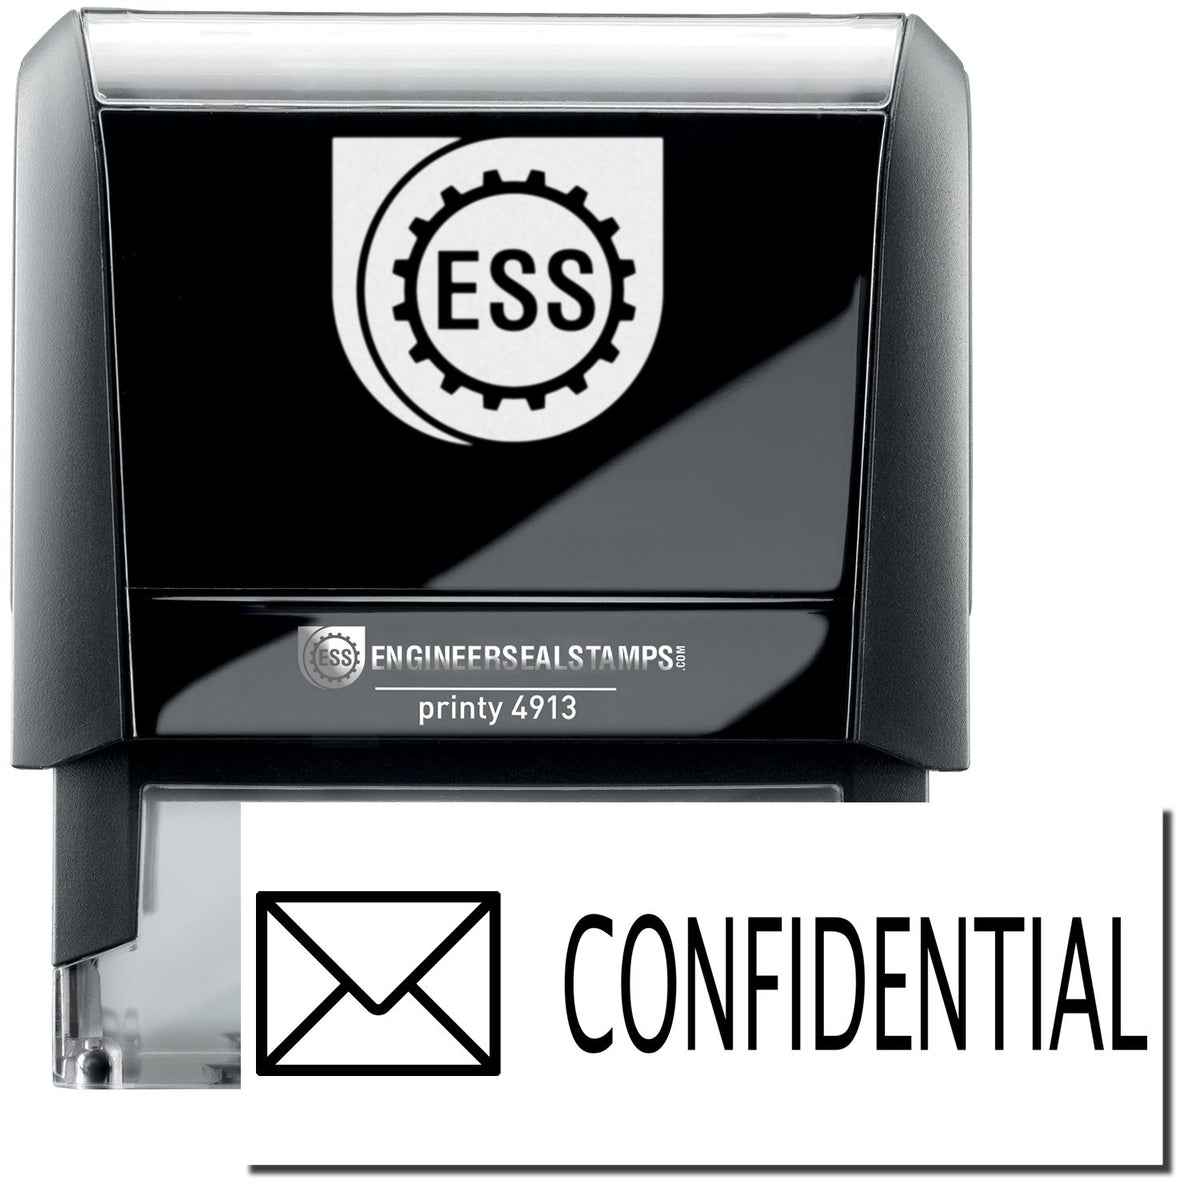 A self-inking stamp with a stamped image showing how the text &quot;CONFIDENTIAL&quot; in a large font with an image of an envelope on the left side is displayed after stamping.